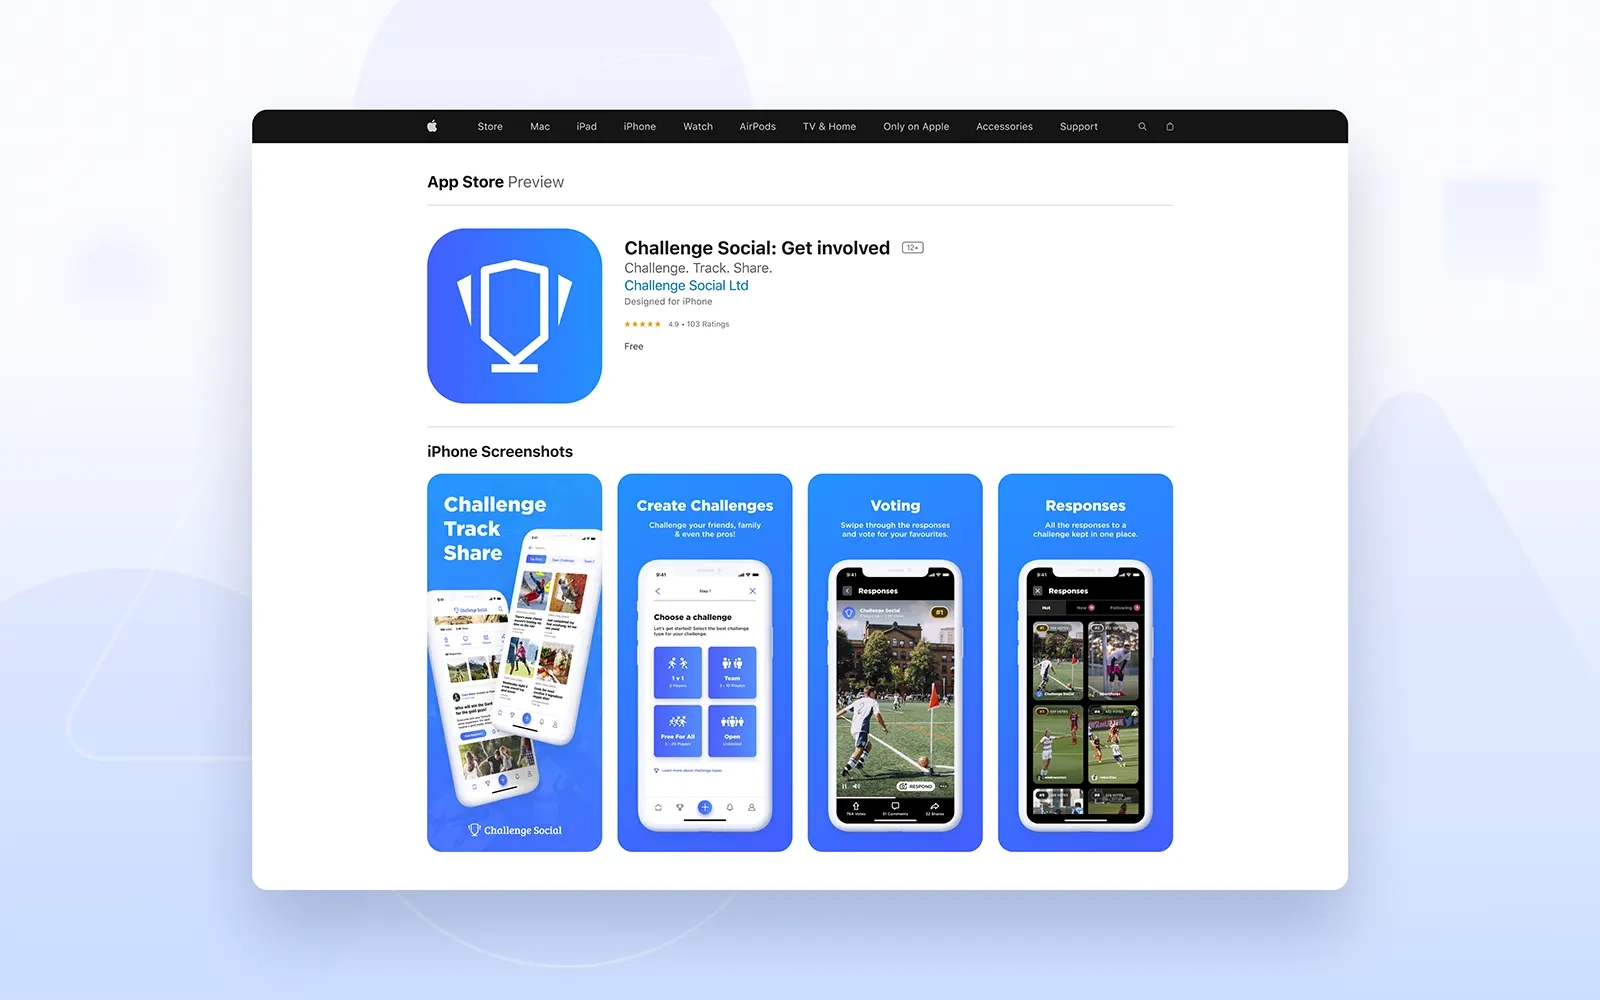 The Challenge Social page on the App Store, showing screenshots of the app against a blue background